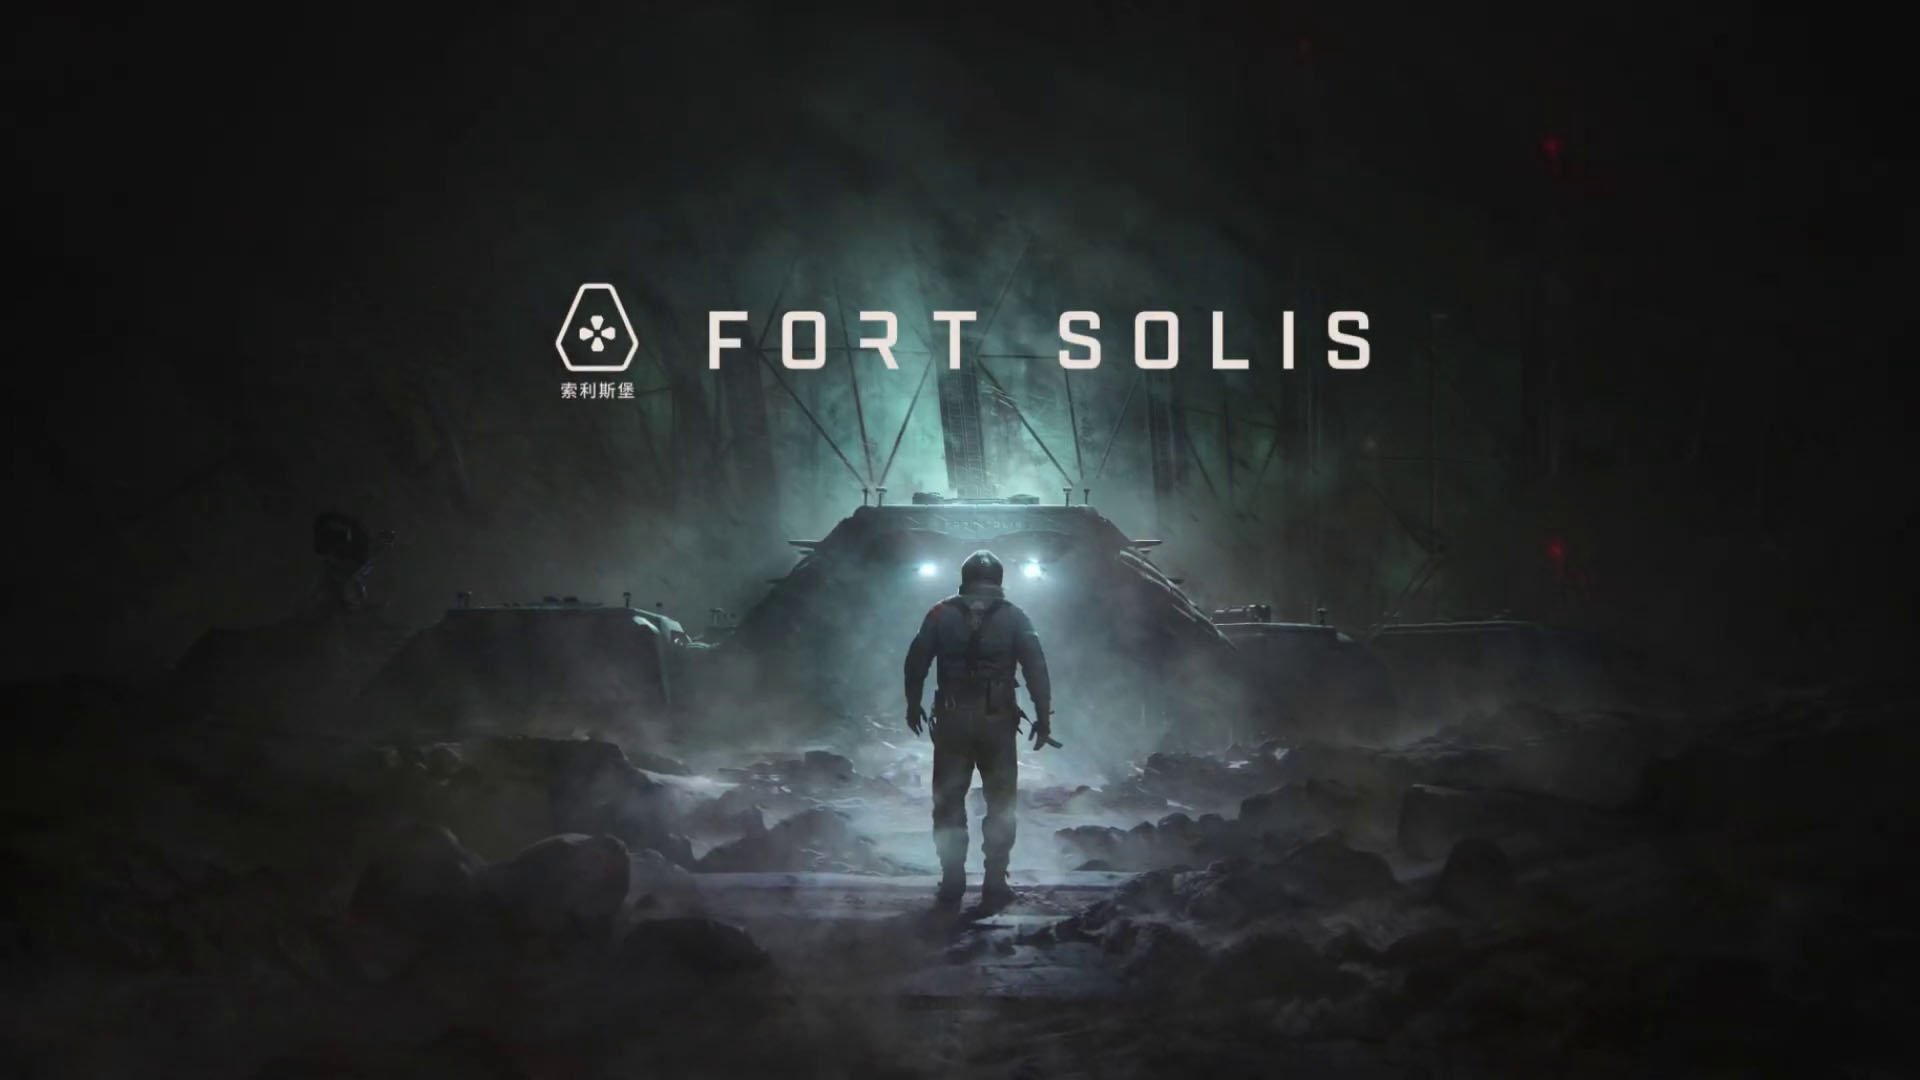 Ready go to ... https://www.gematsu.com/2023/03/fort-solis-adds-ps5-version-gameplay-trailer [ Fort Solis adds PS5 version, ‘Gameplay’ trailer]